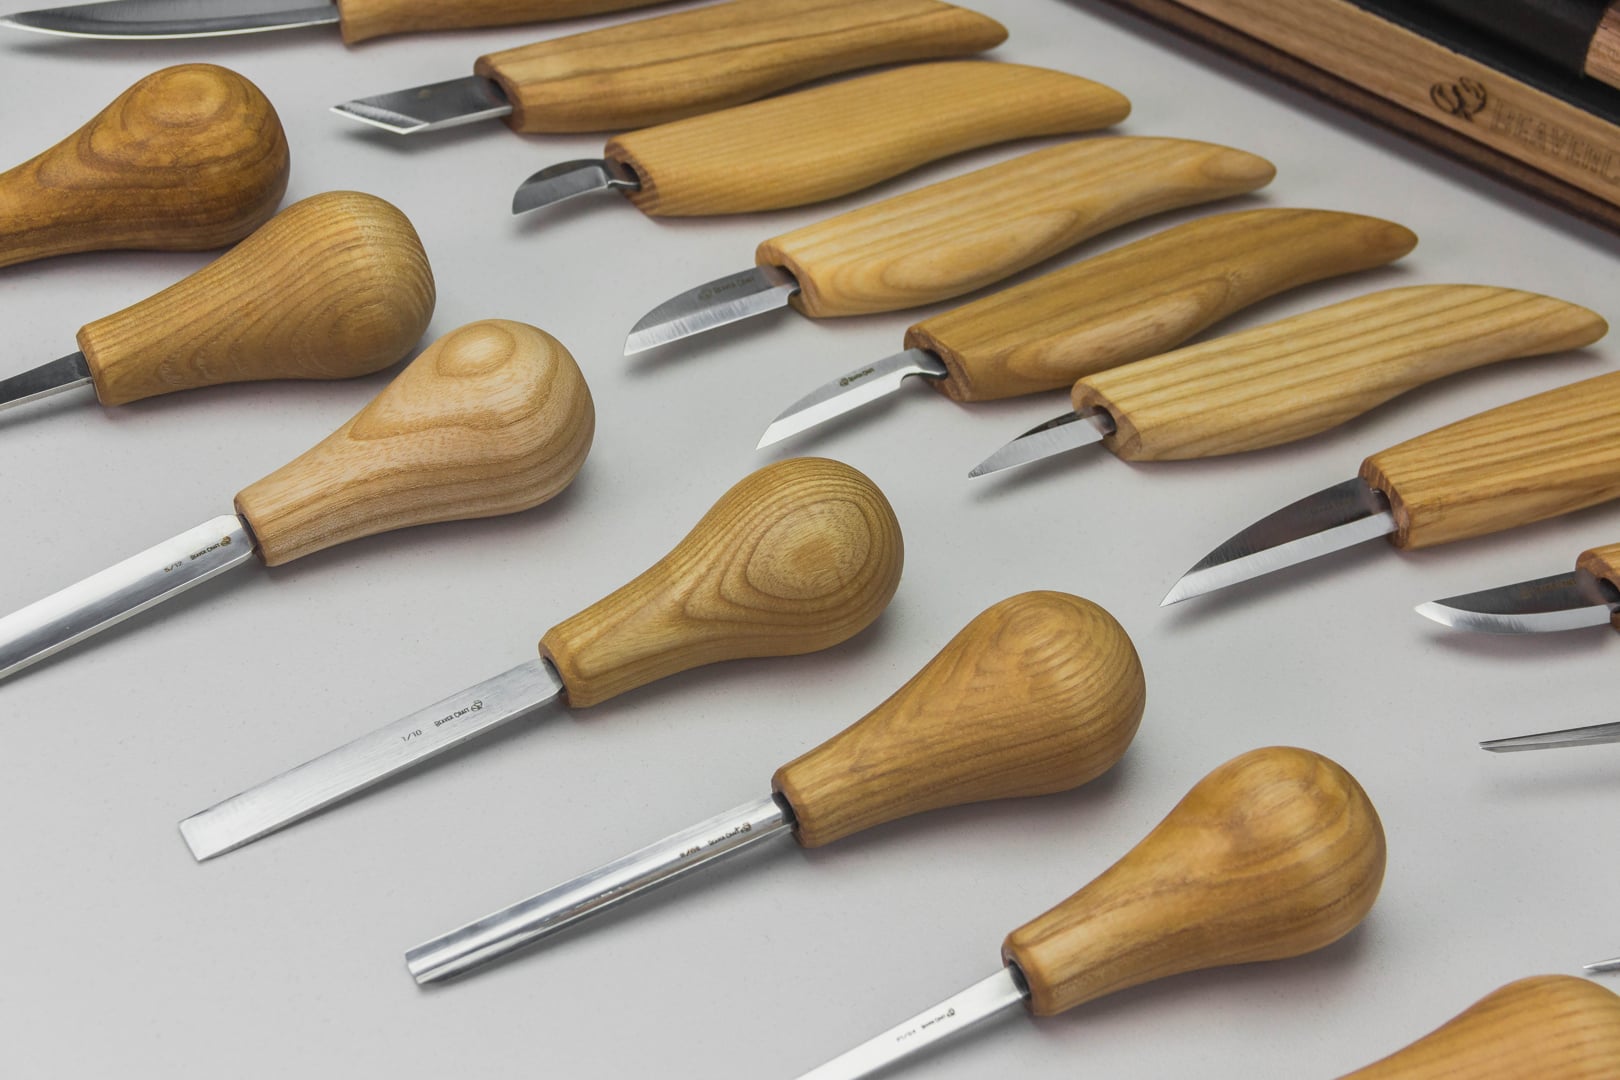  Sculpture House Wood and Linoleum Carving Tools K7 set of 5 :  Arts, Crafts & Sewing